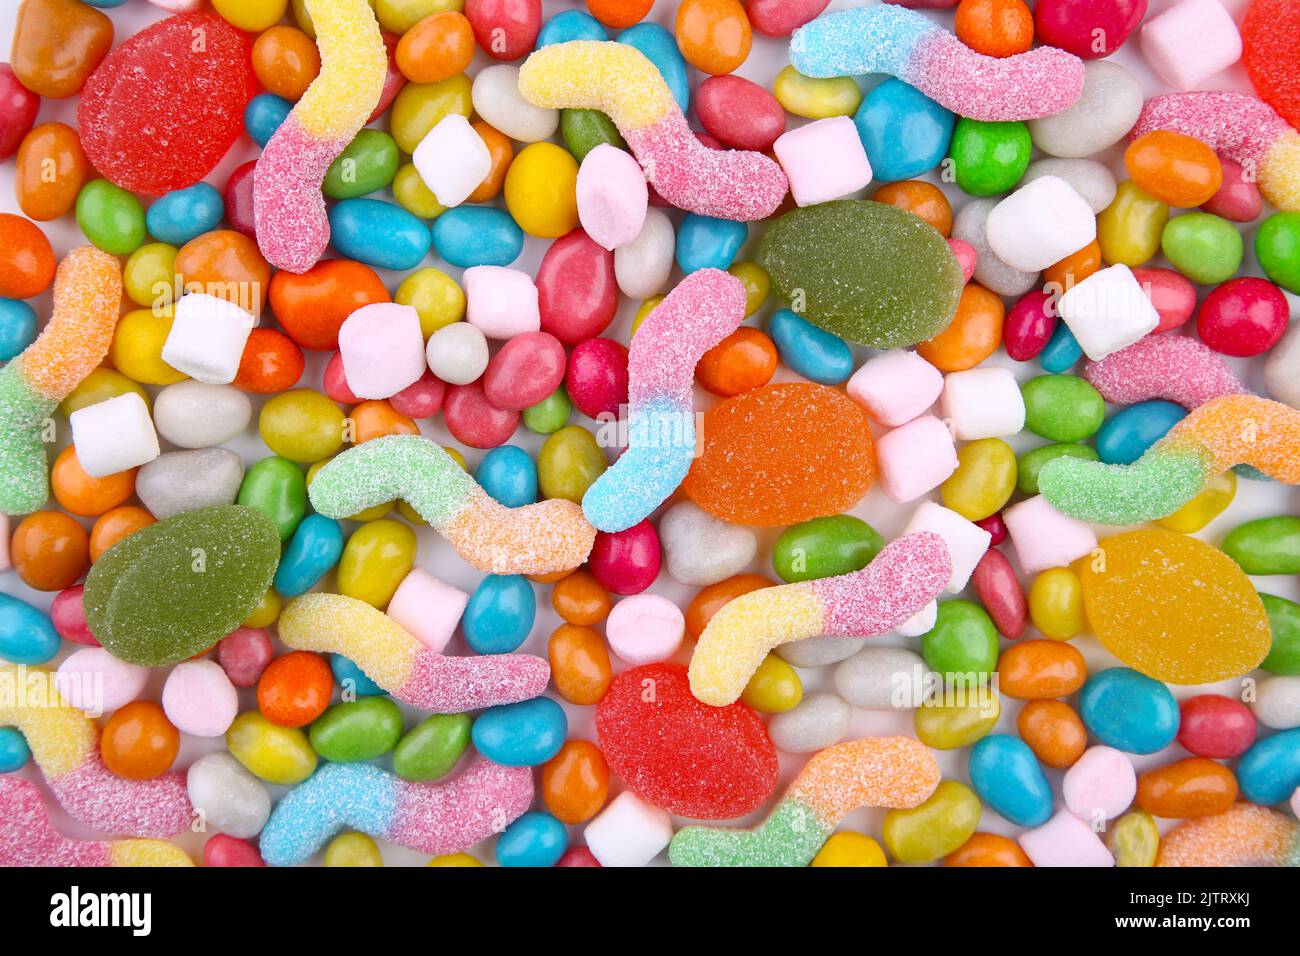 Assorted mix of various candies and jellies. Colorful sweets Stock Photo